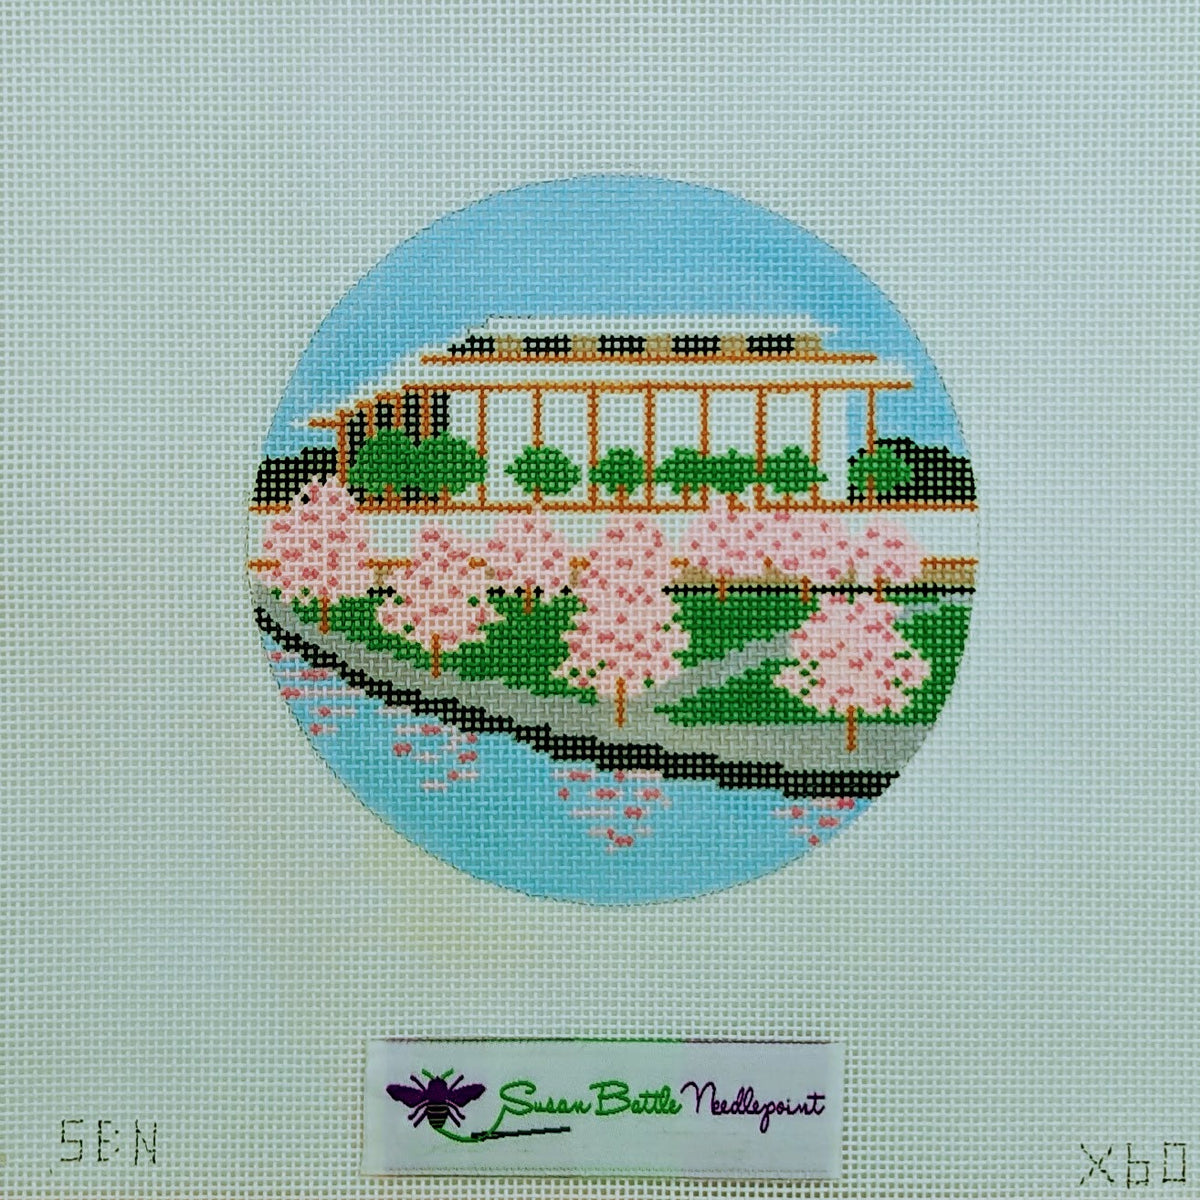 Kennedy Center with Cherry Blossoms ornament